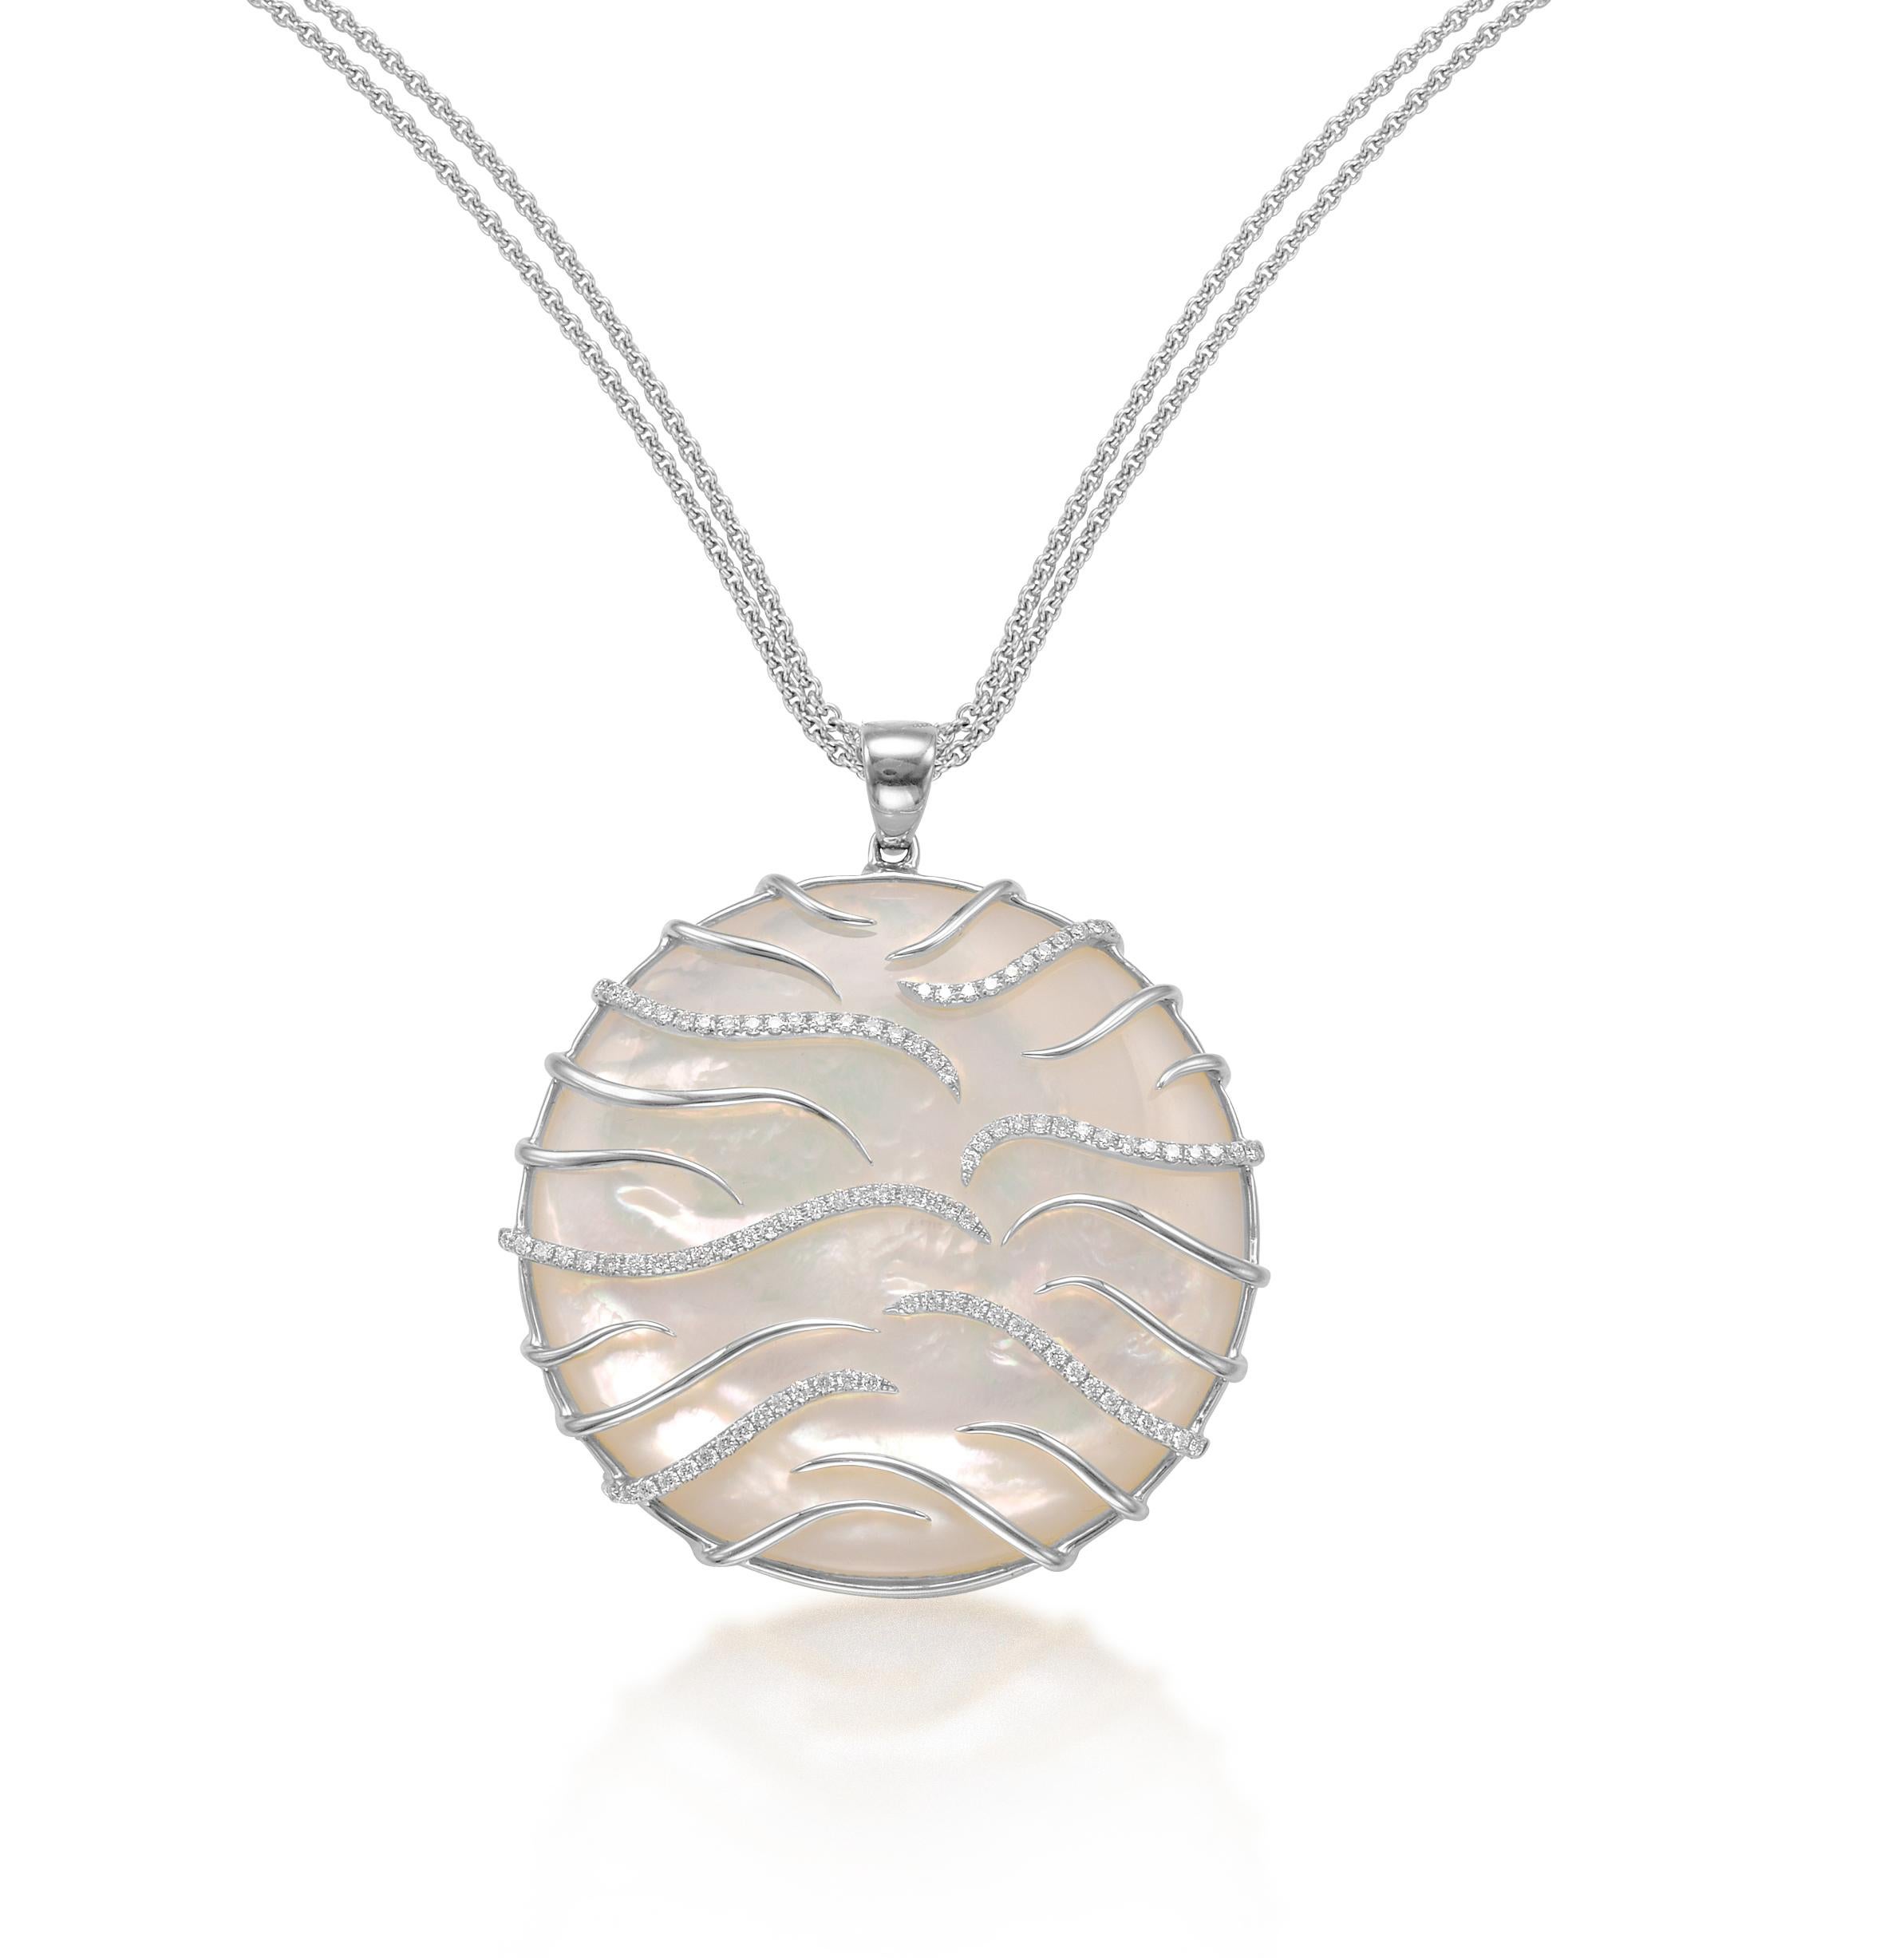 14K WG LARGE RD MOP AND DIA LUNA MEDALLION PENDANT WITH CHAIN
MOP 55.59 CT, 96 DIA 0.64 Carats